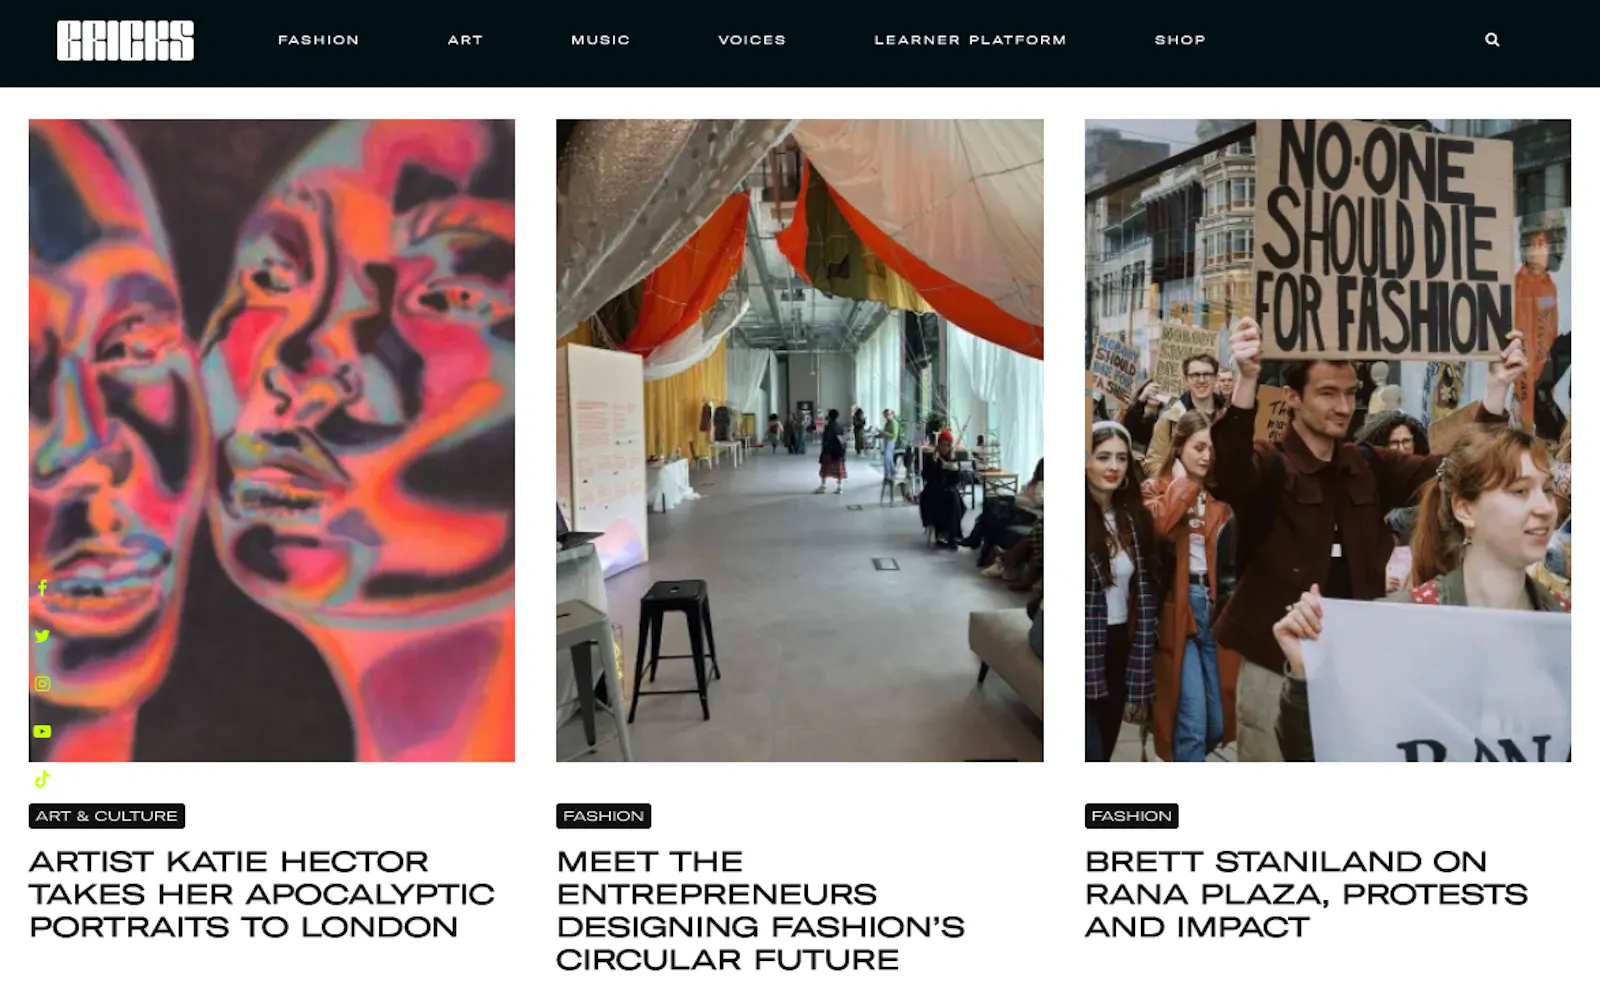 Examples of stories on theBRICKS Magazine website. Topics include photography, fashion and labour rights.